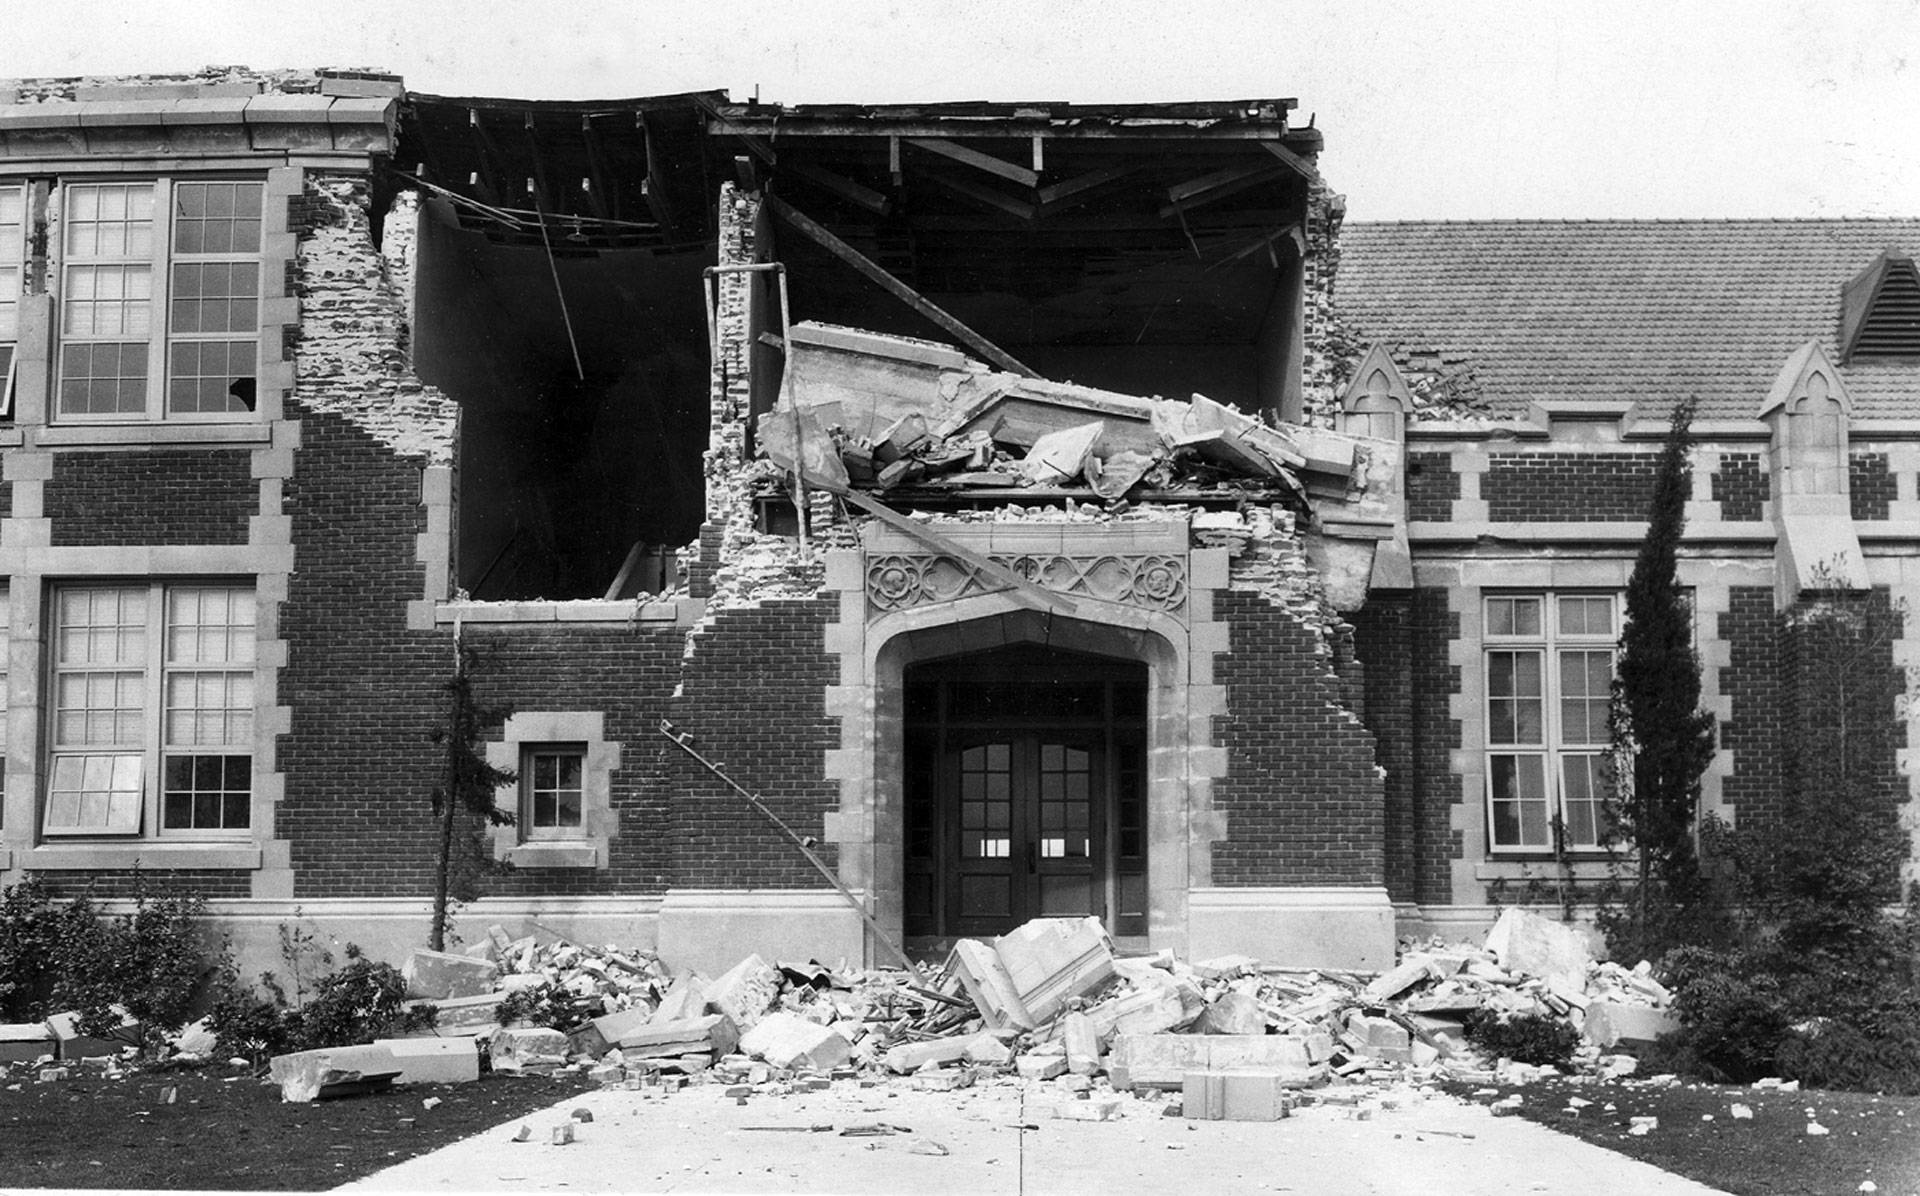 The ruins of John Muir School in Long Beach after an earthquake struck on March 10, 1933. Wikimedia Commons